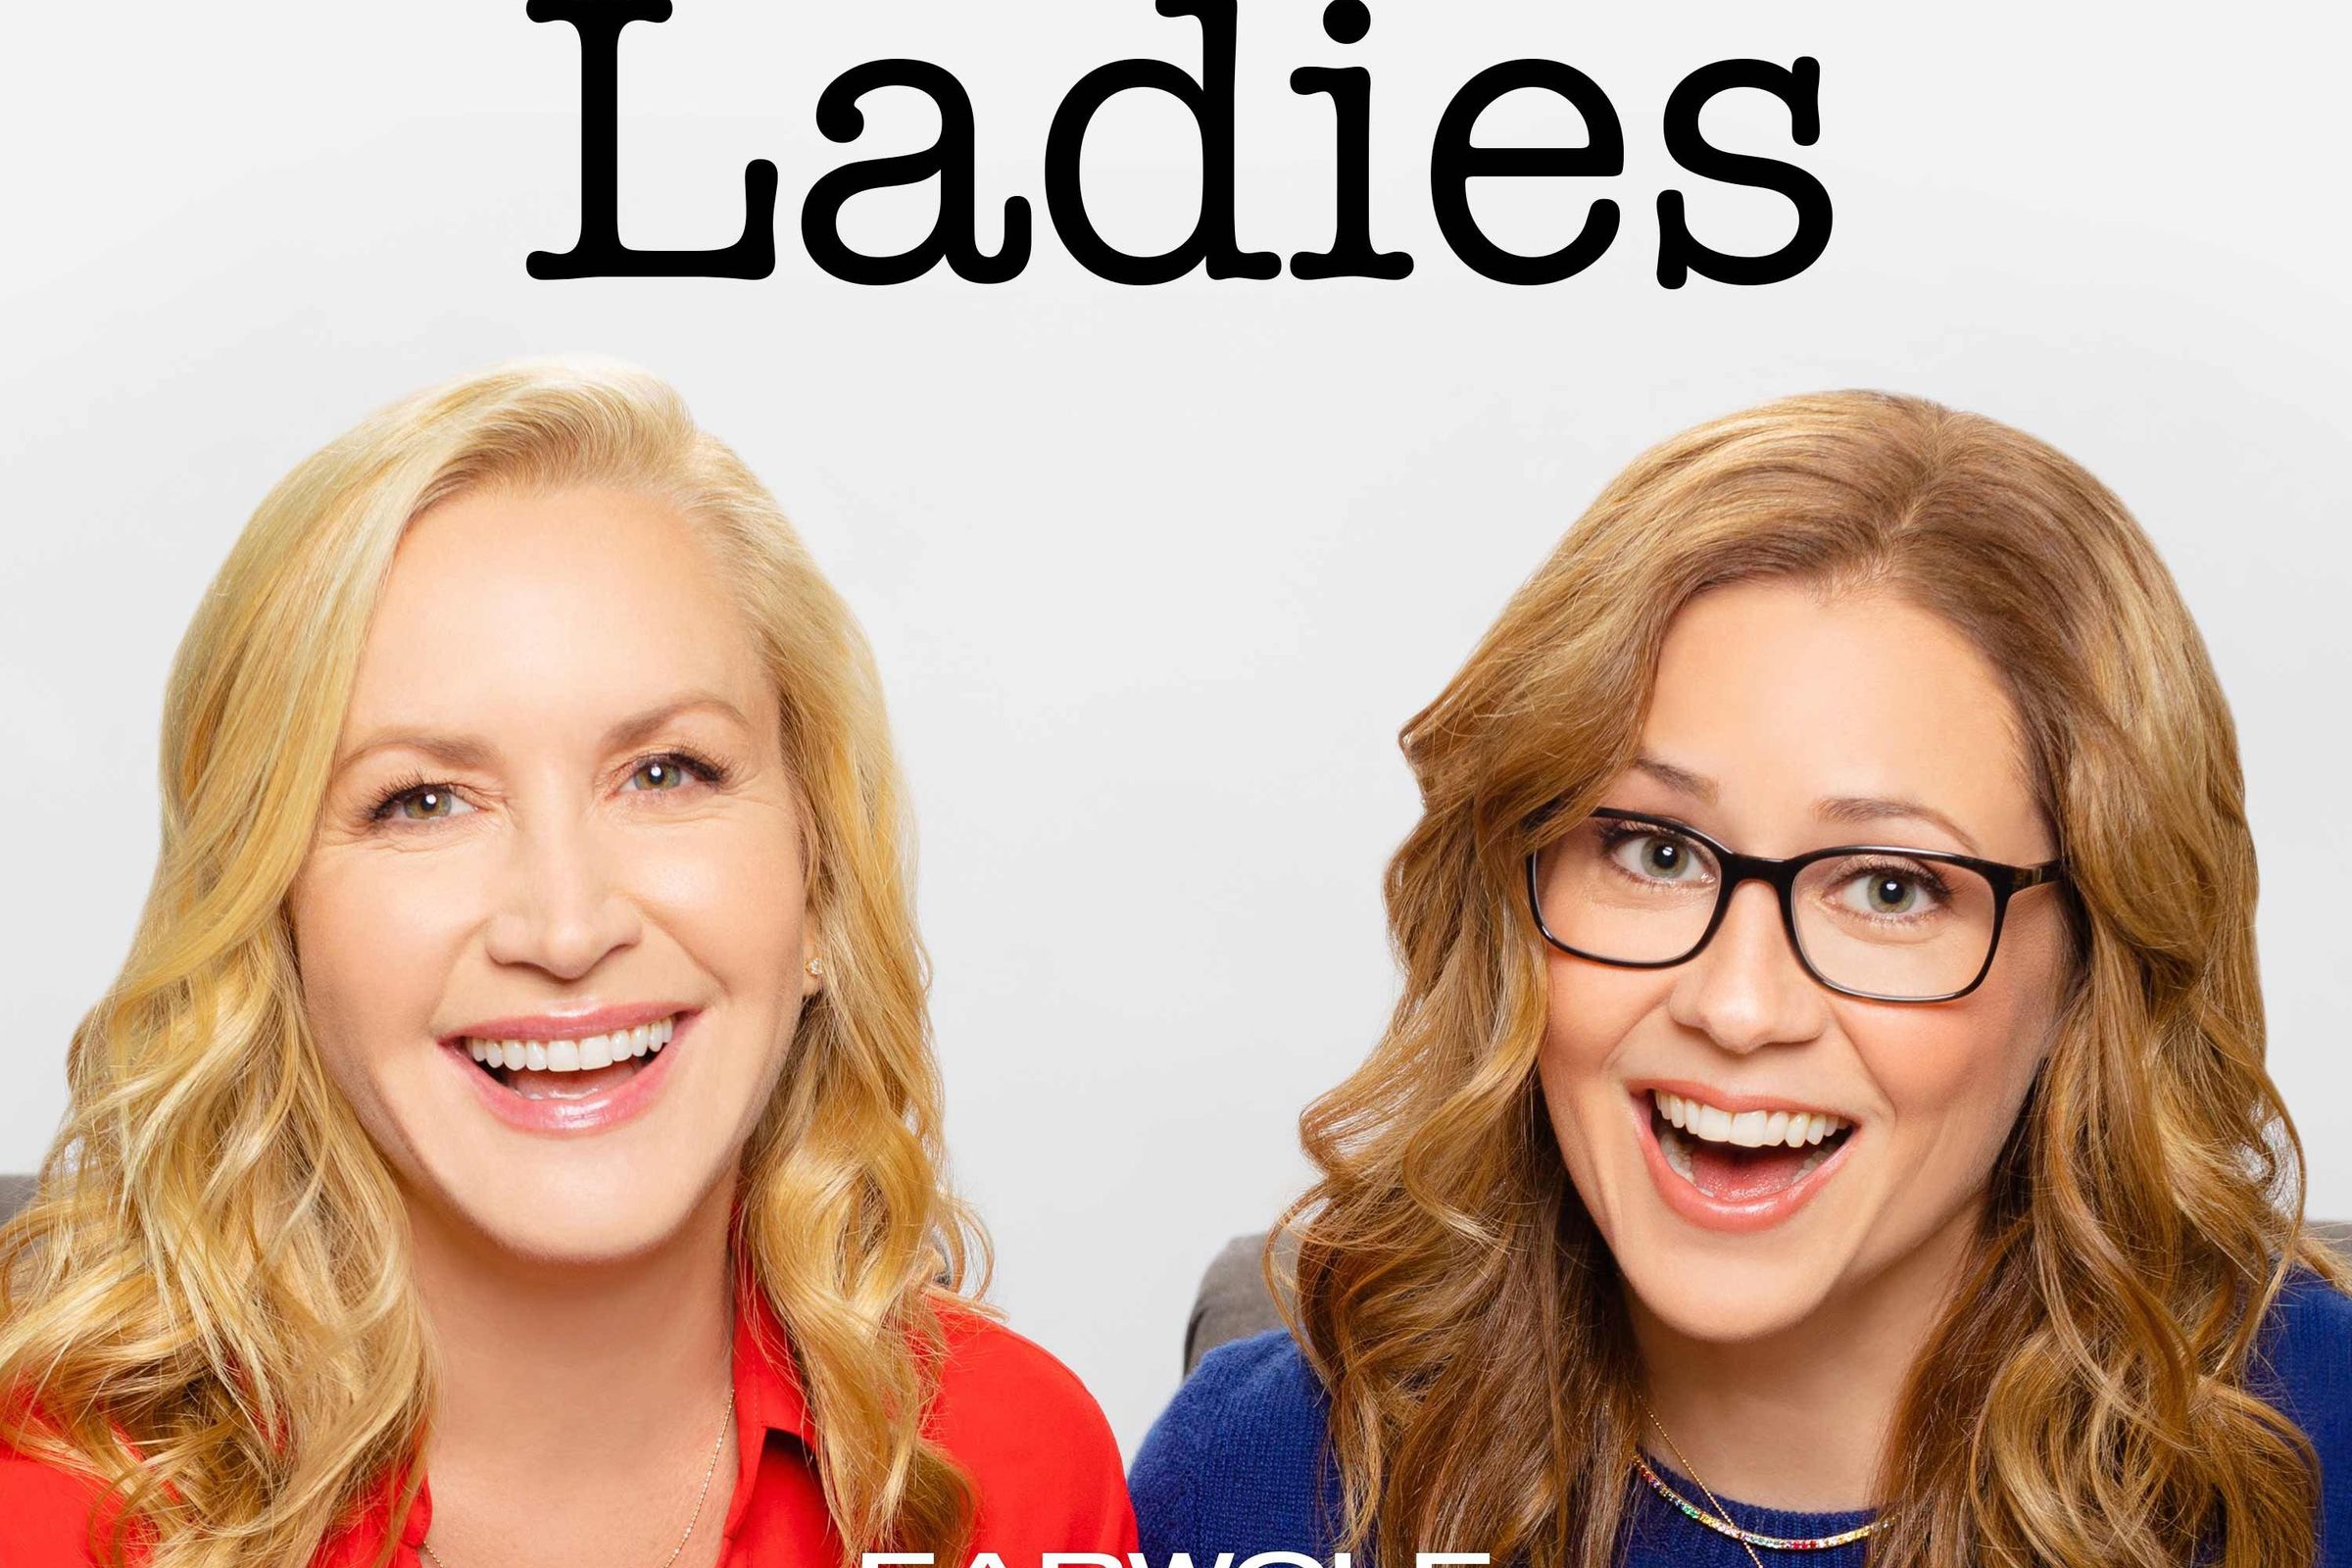 The cover art for Office Ladies.